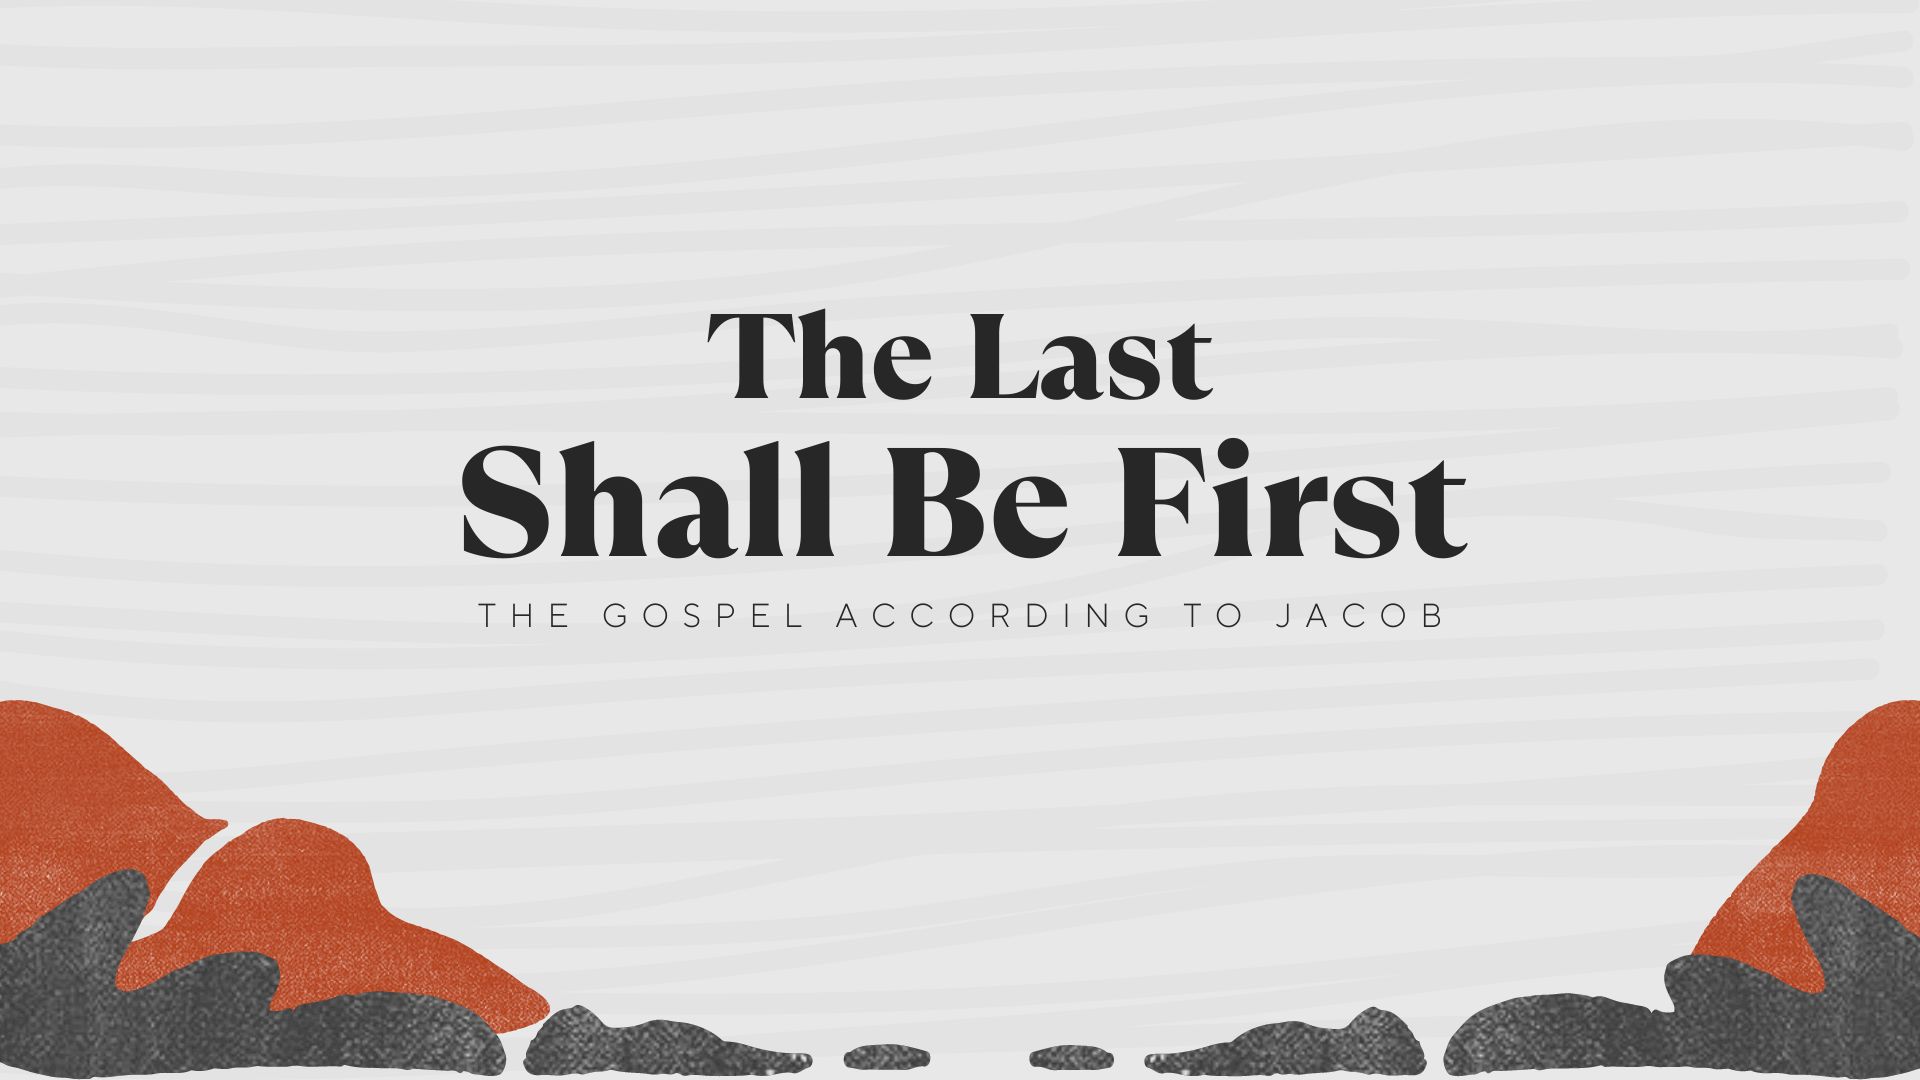 The Last Shall Be First: Facing Difficult Situations